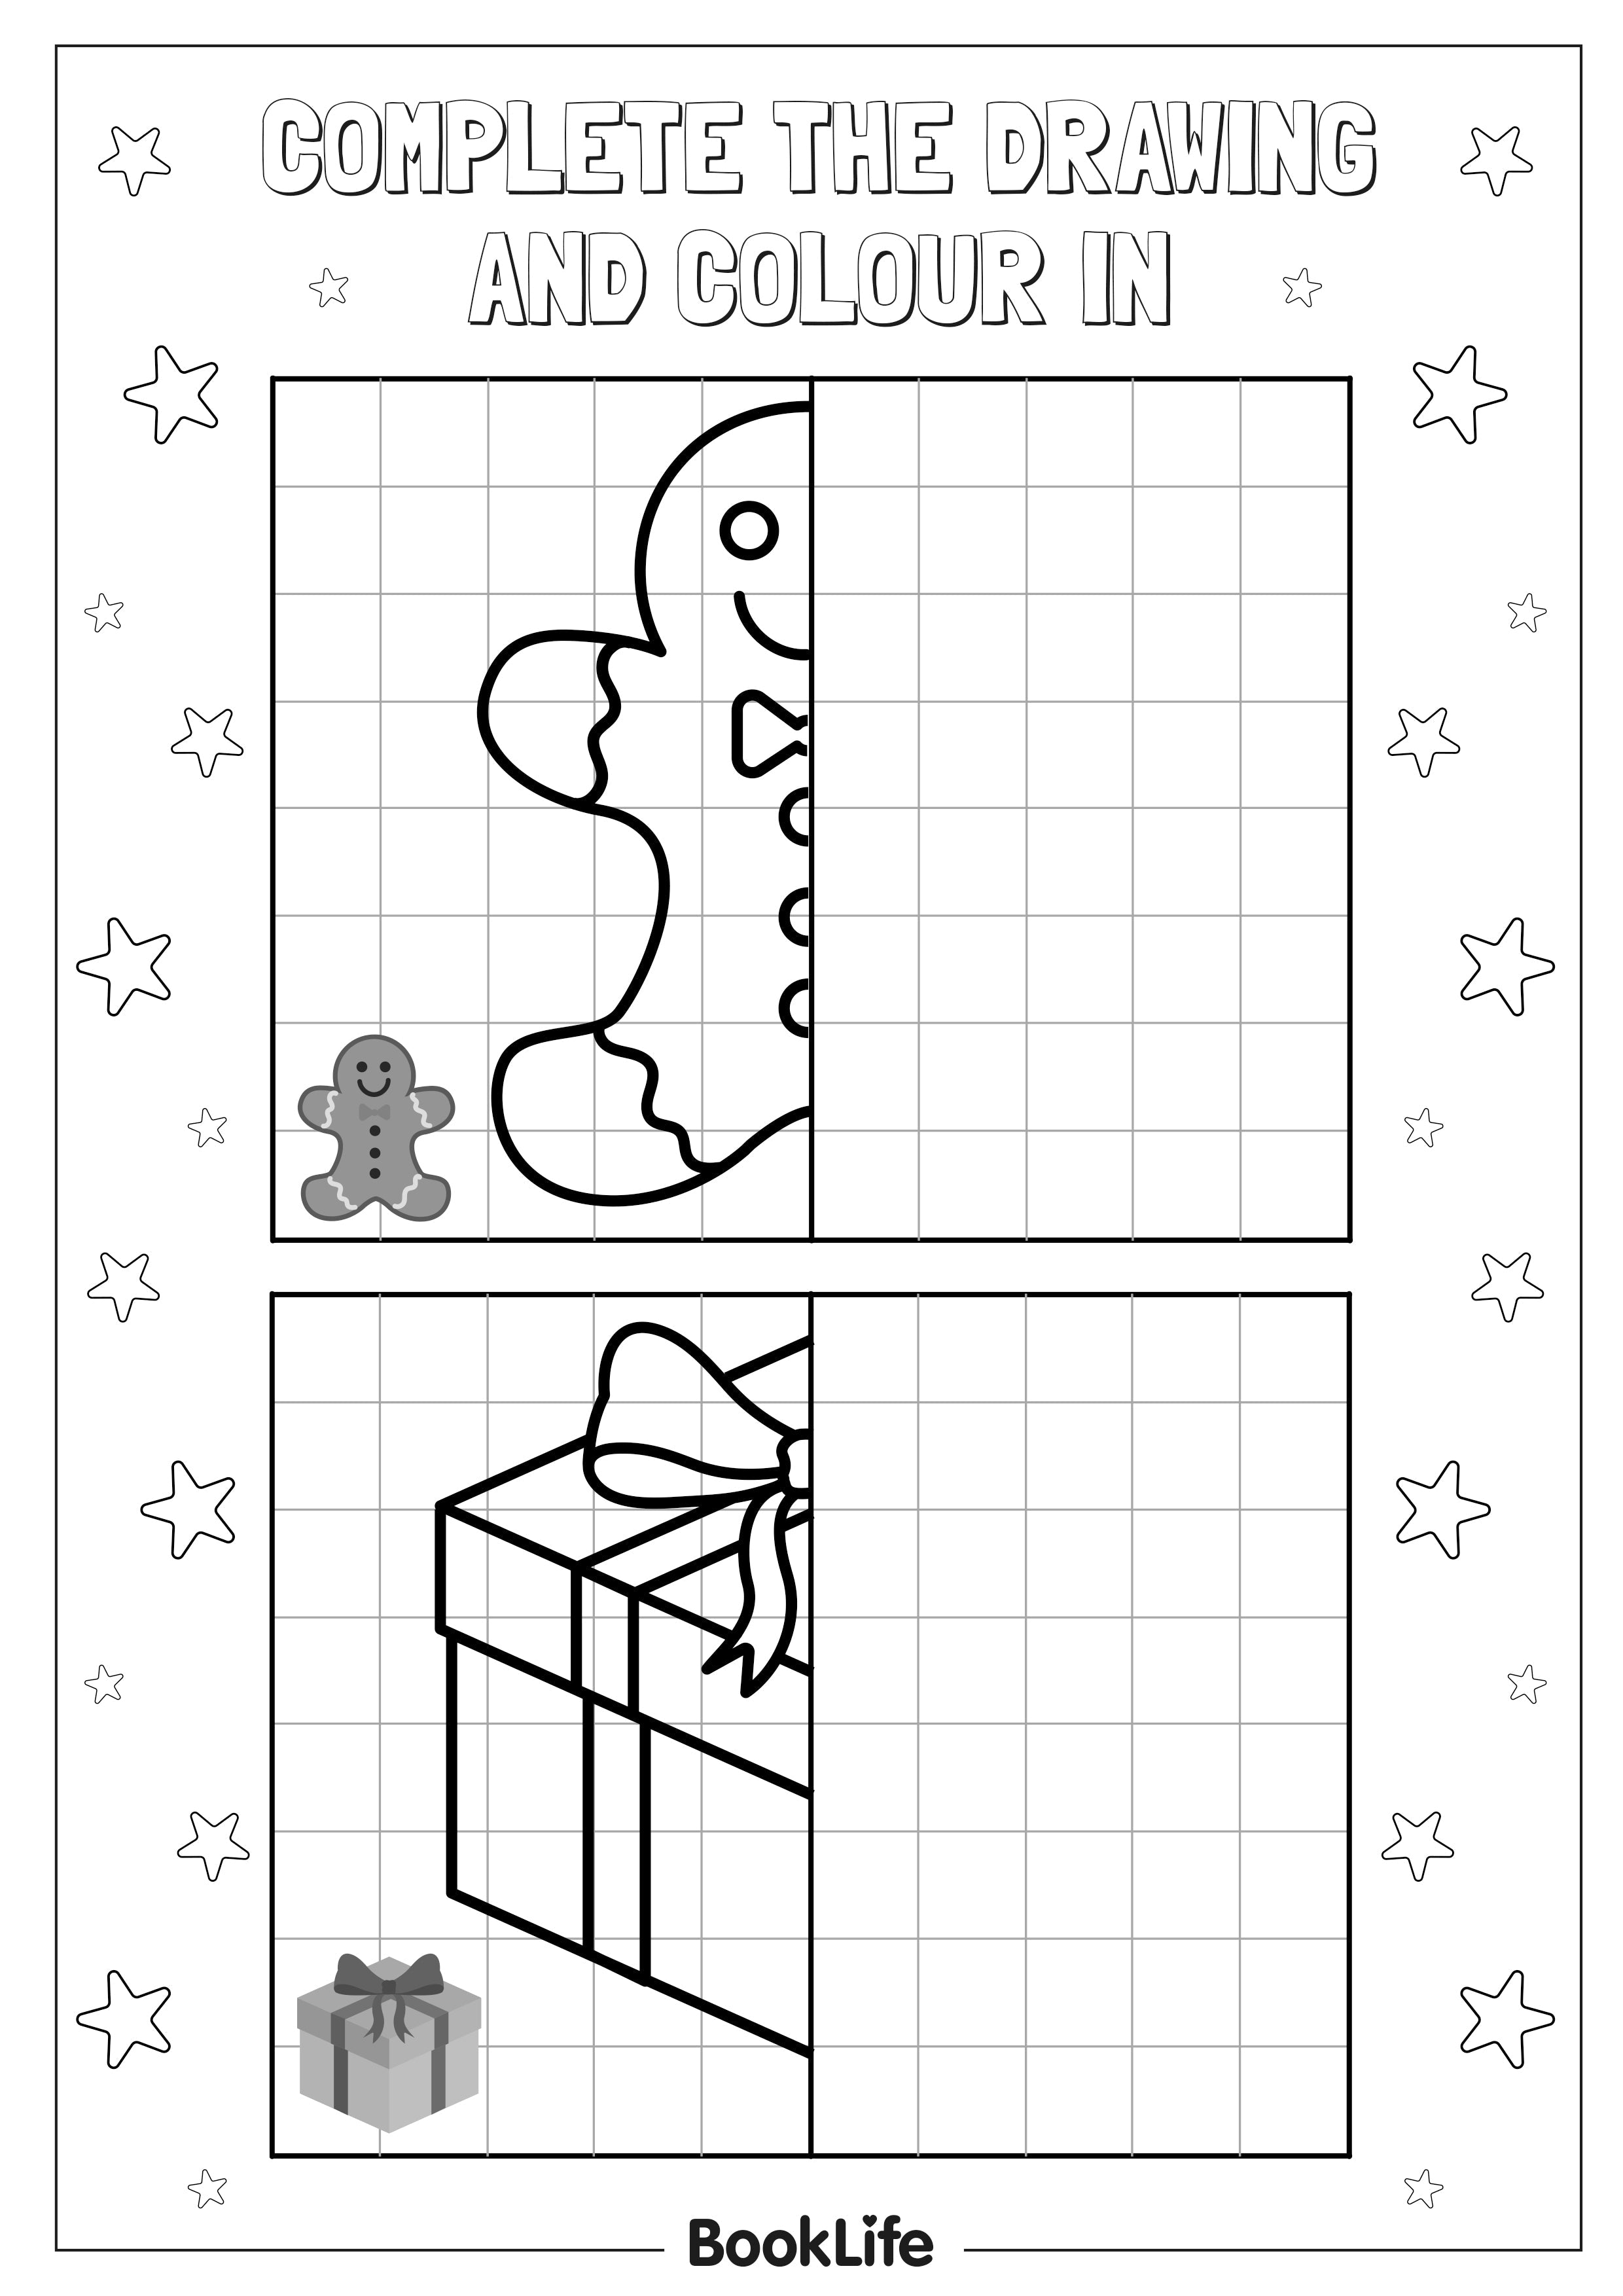 Complete the Christmas Drawing Activity Sheet